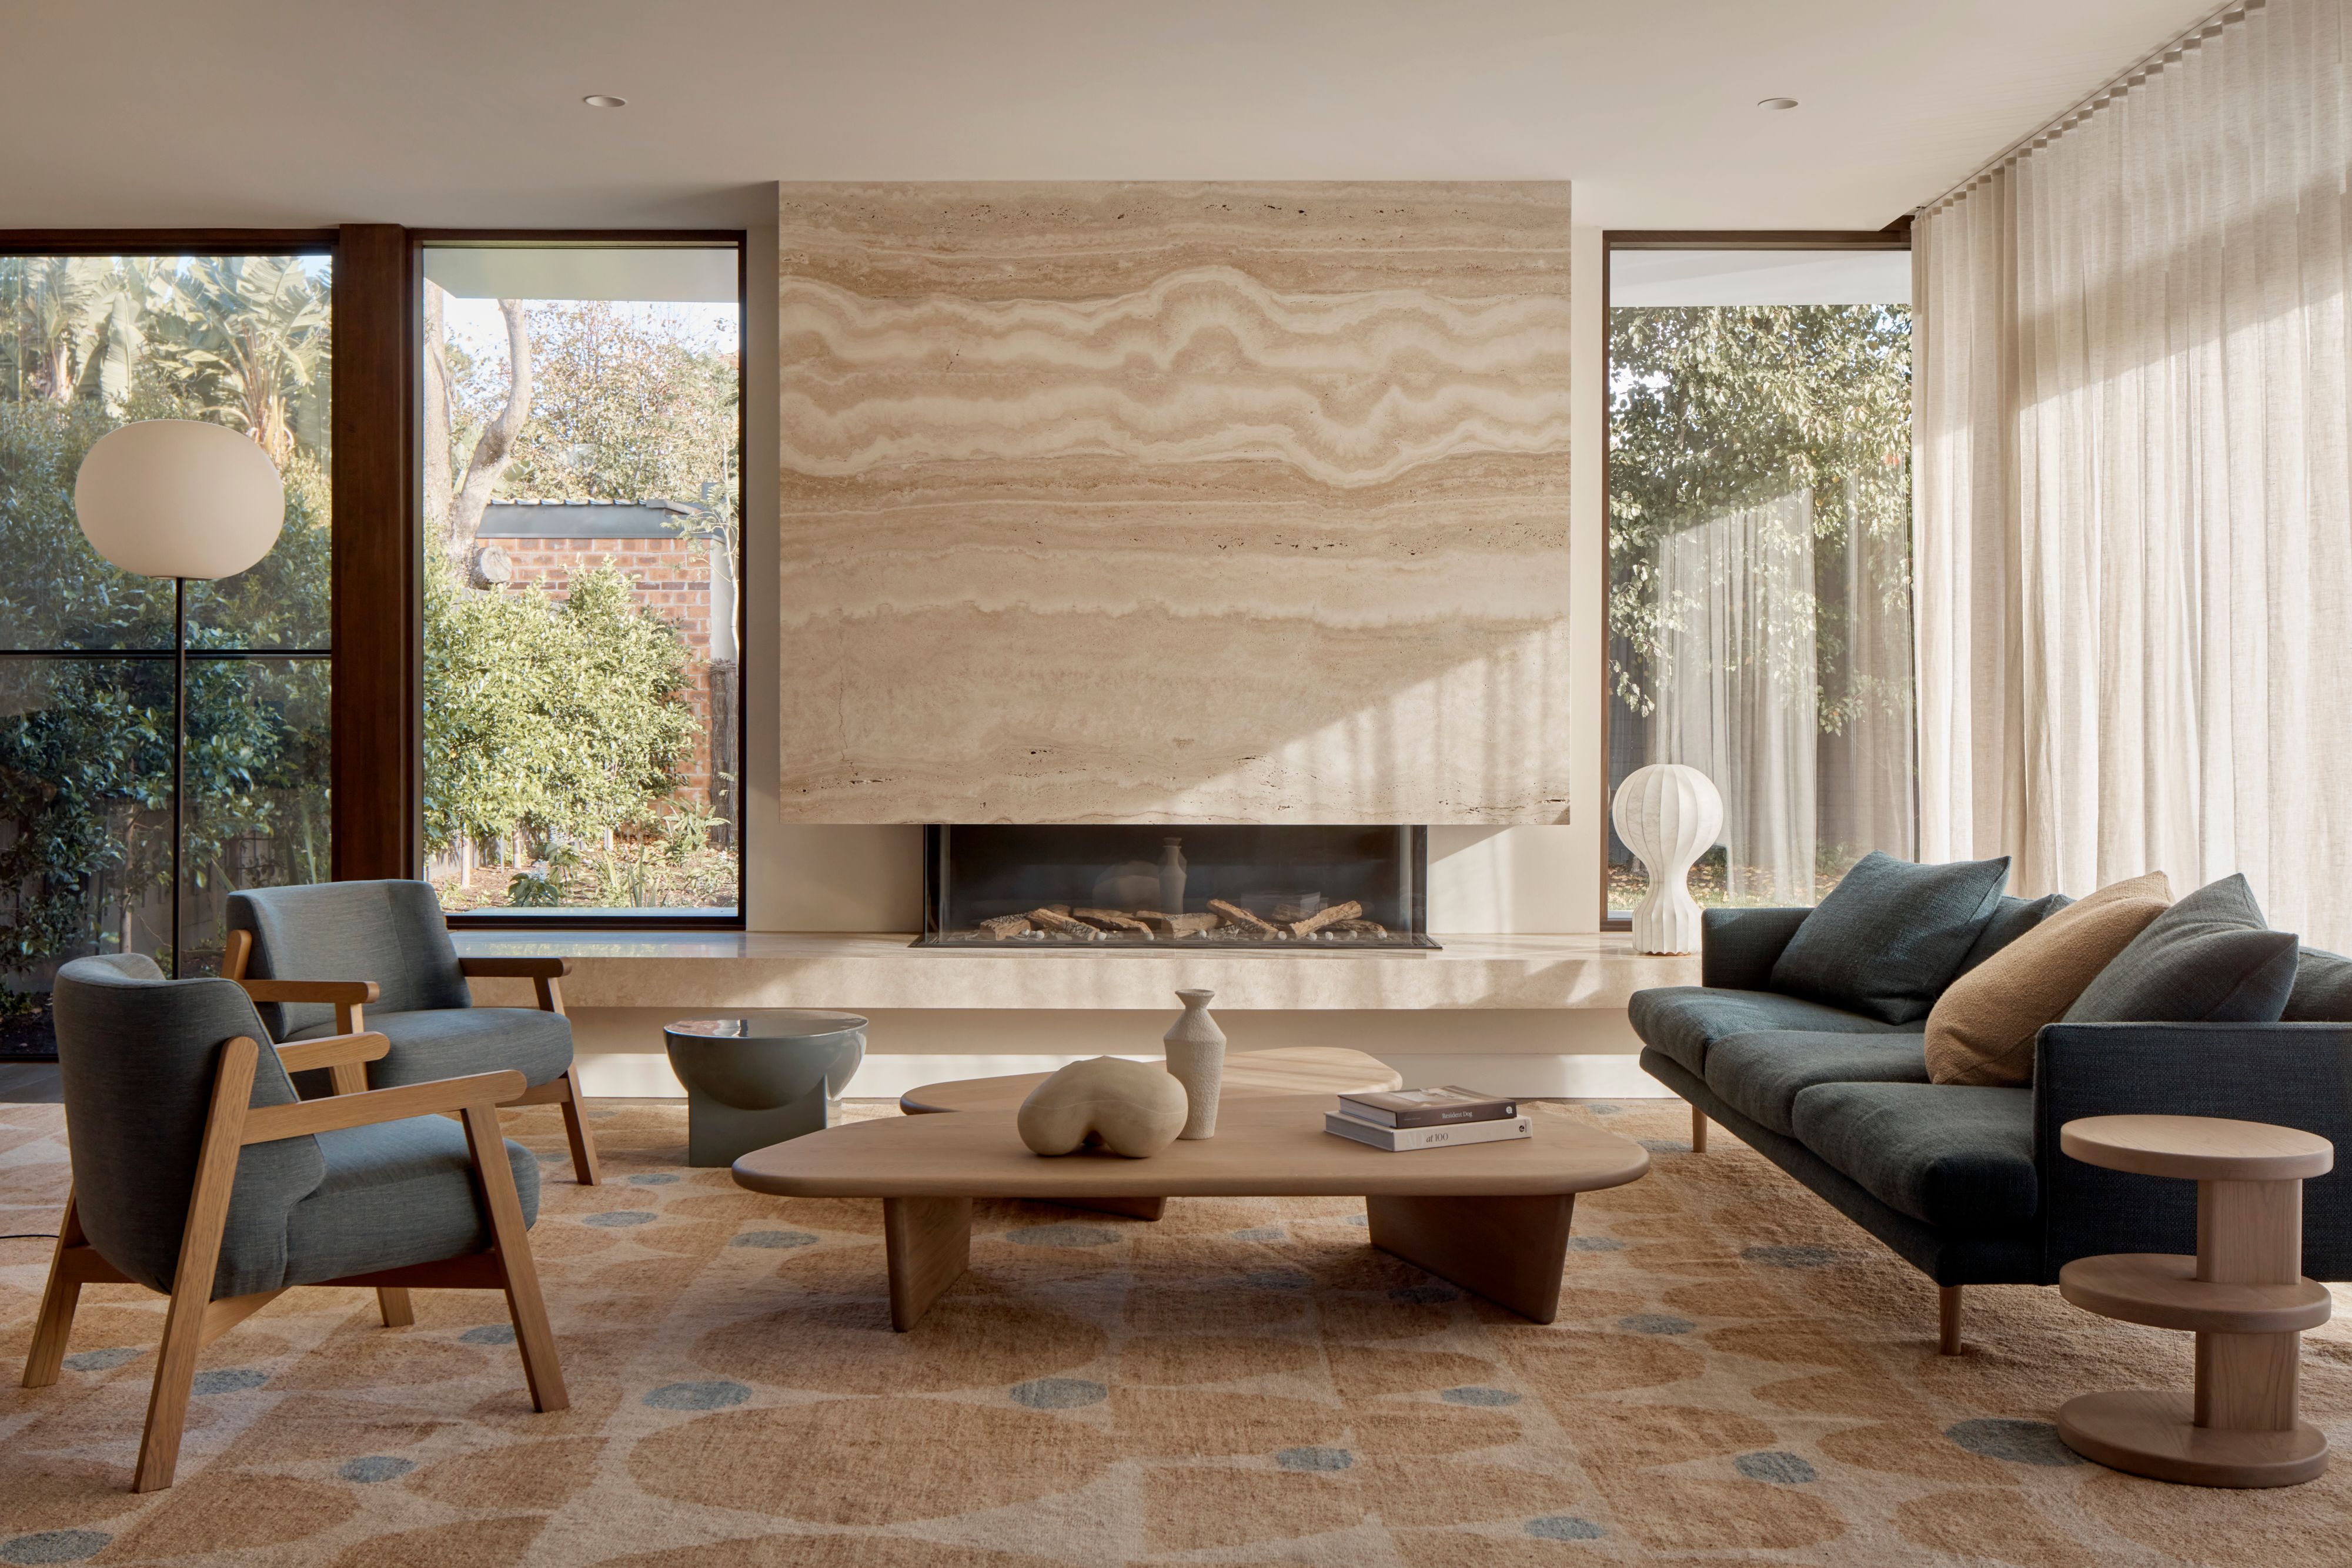 image of Kent House - Travertine fireplace in living room
